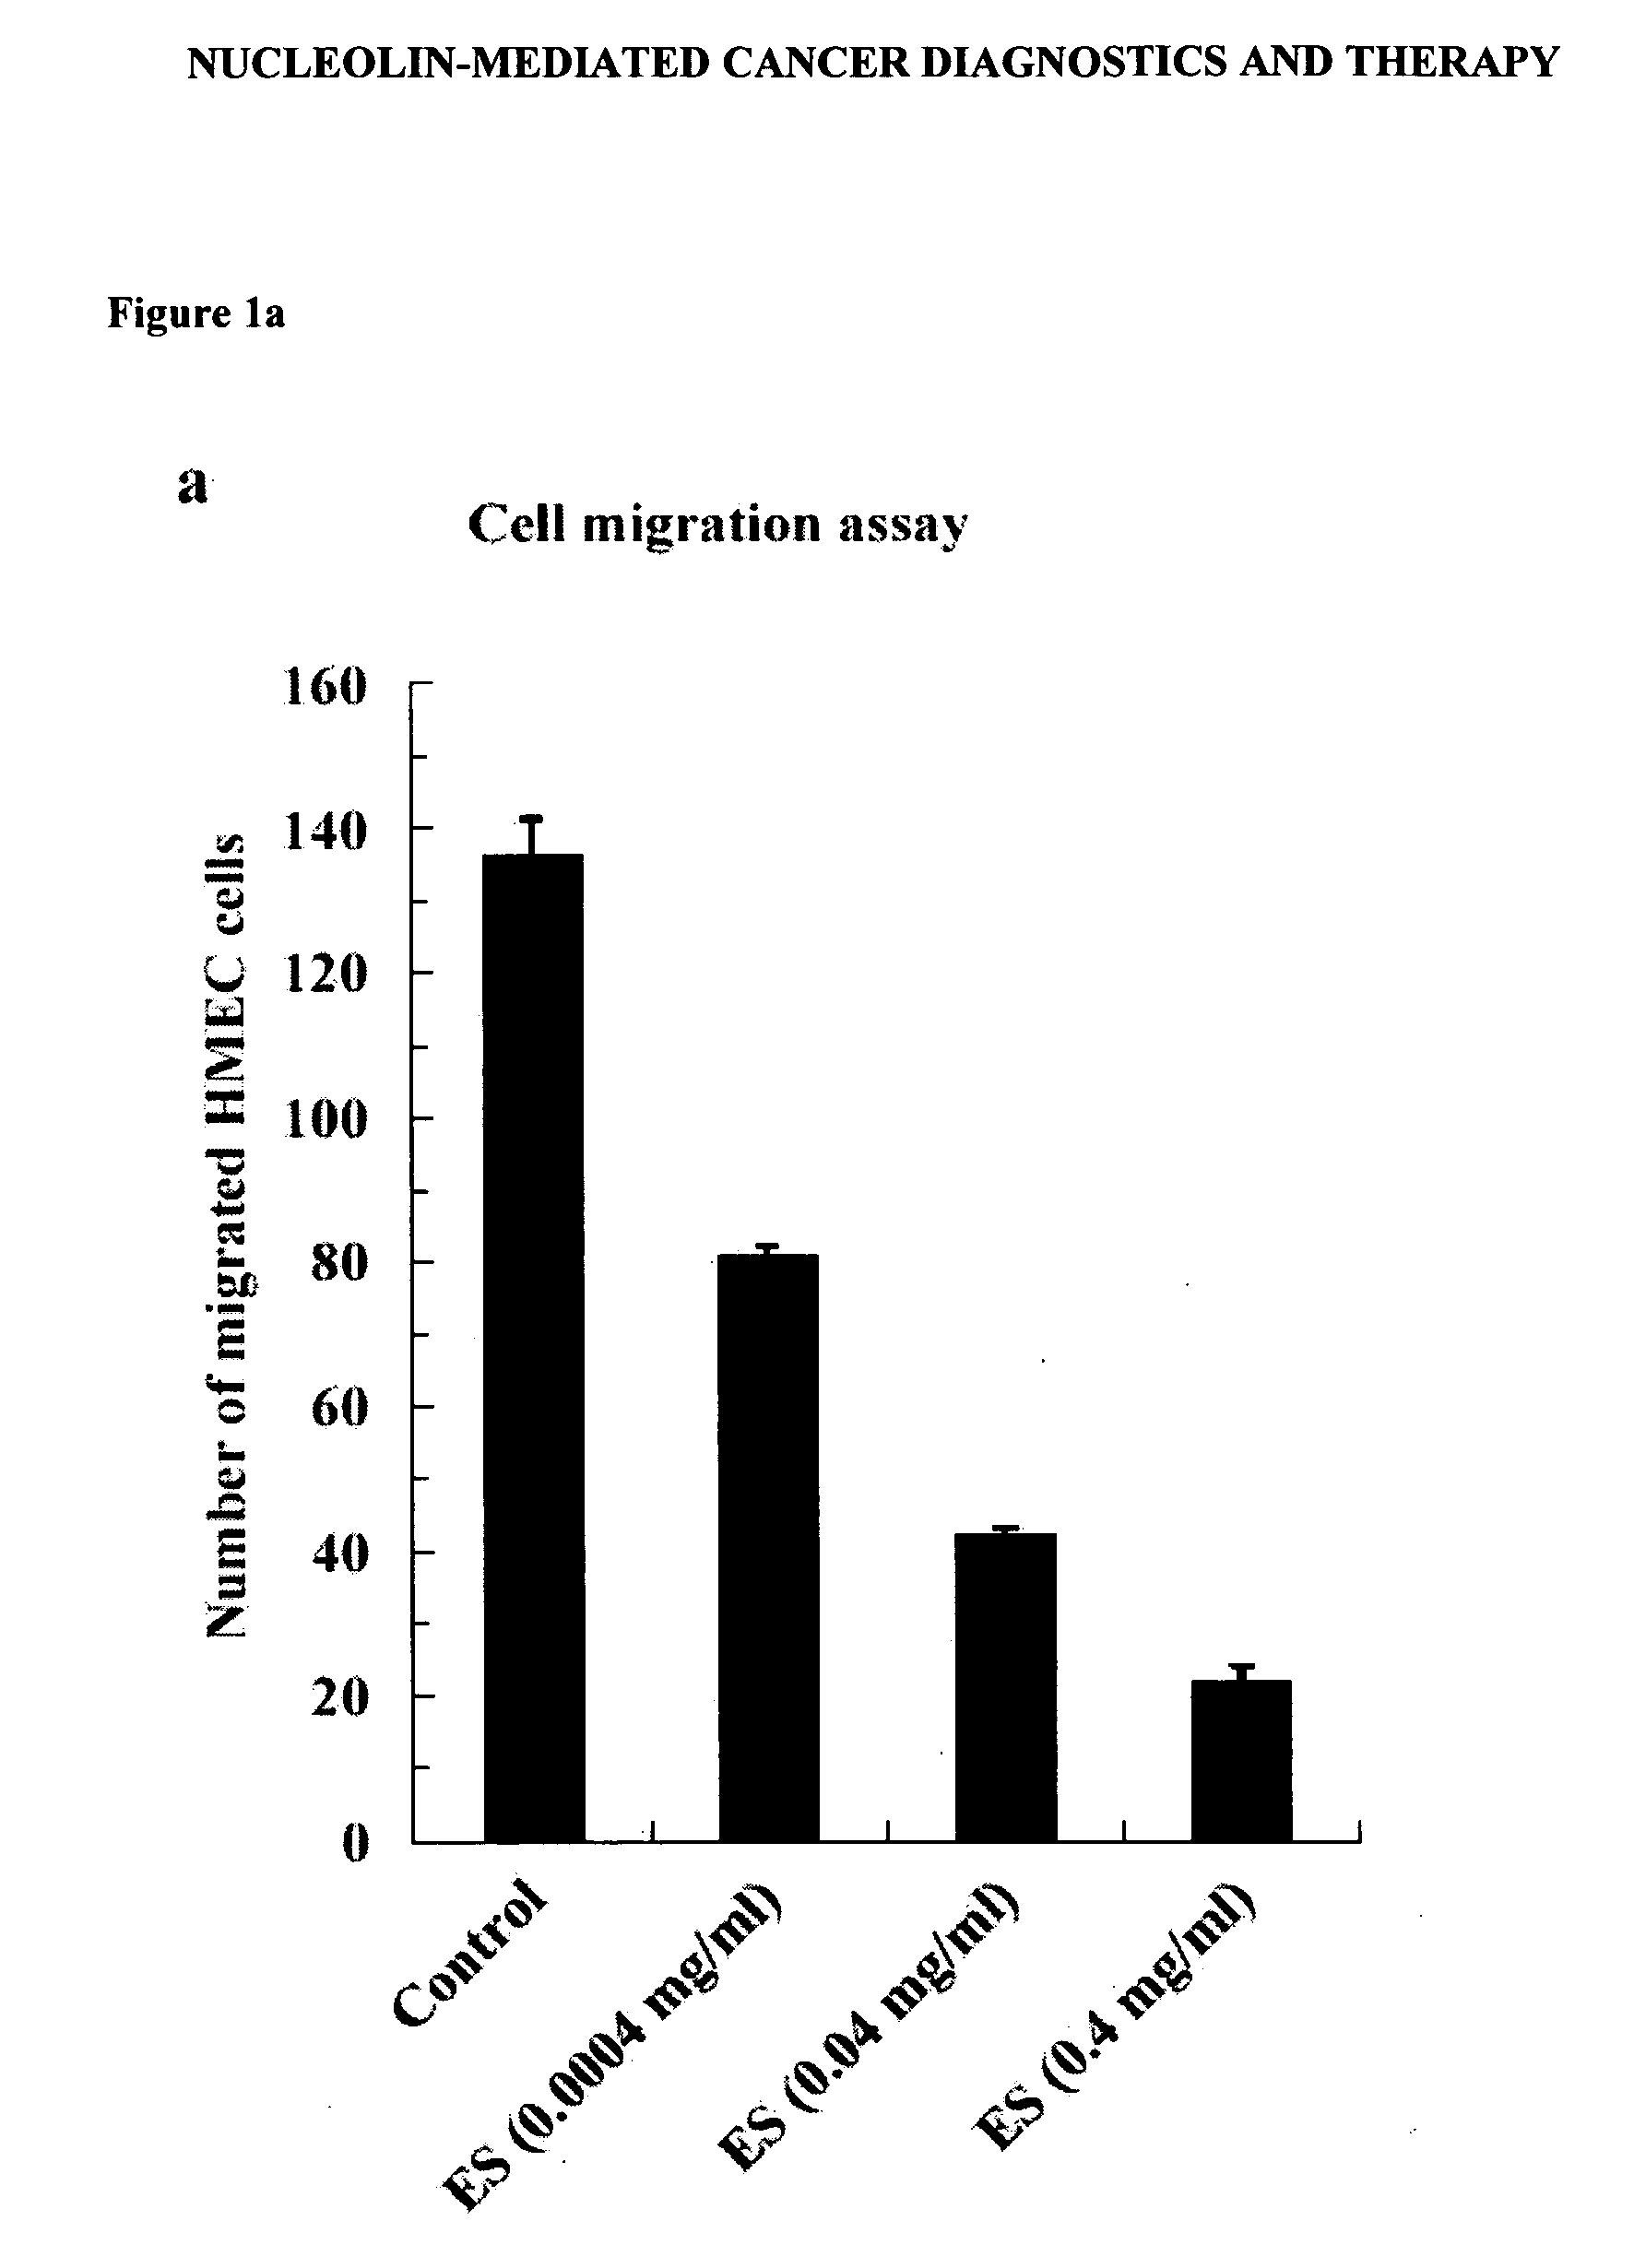 Nucleolin-mediated cancer diagnostics and therapy